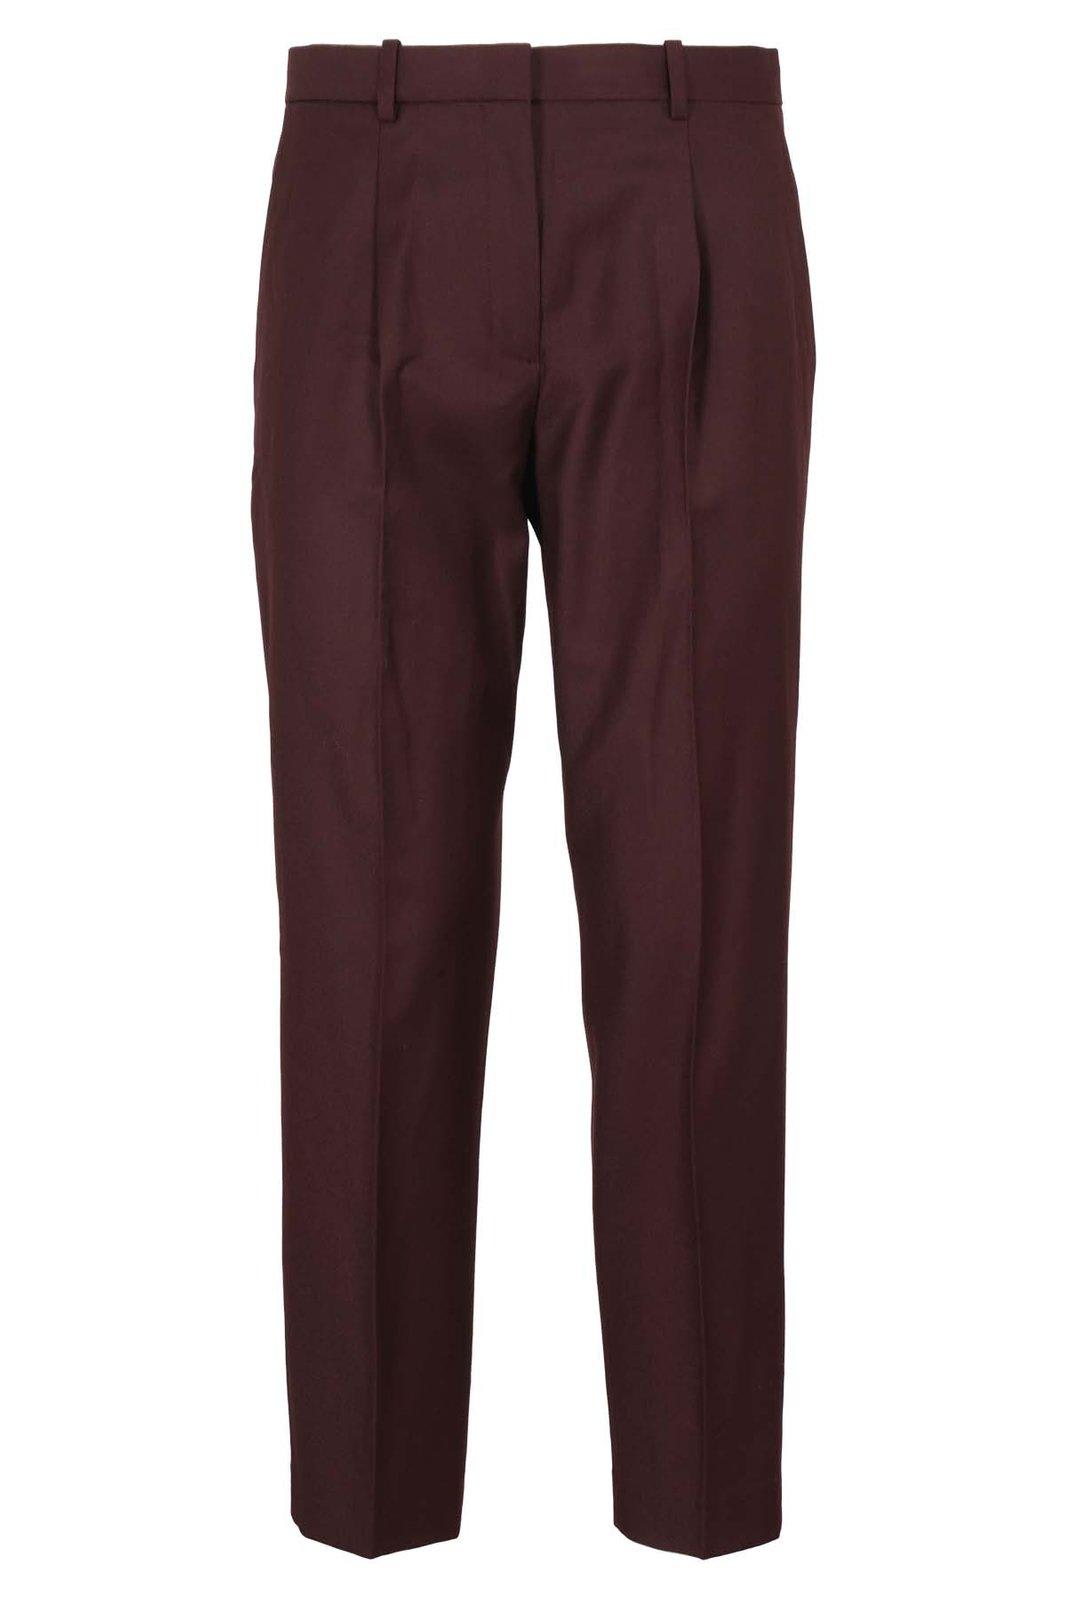 Theory Tailored-cut High-waisted Pants